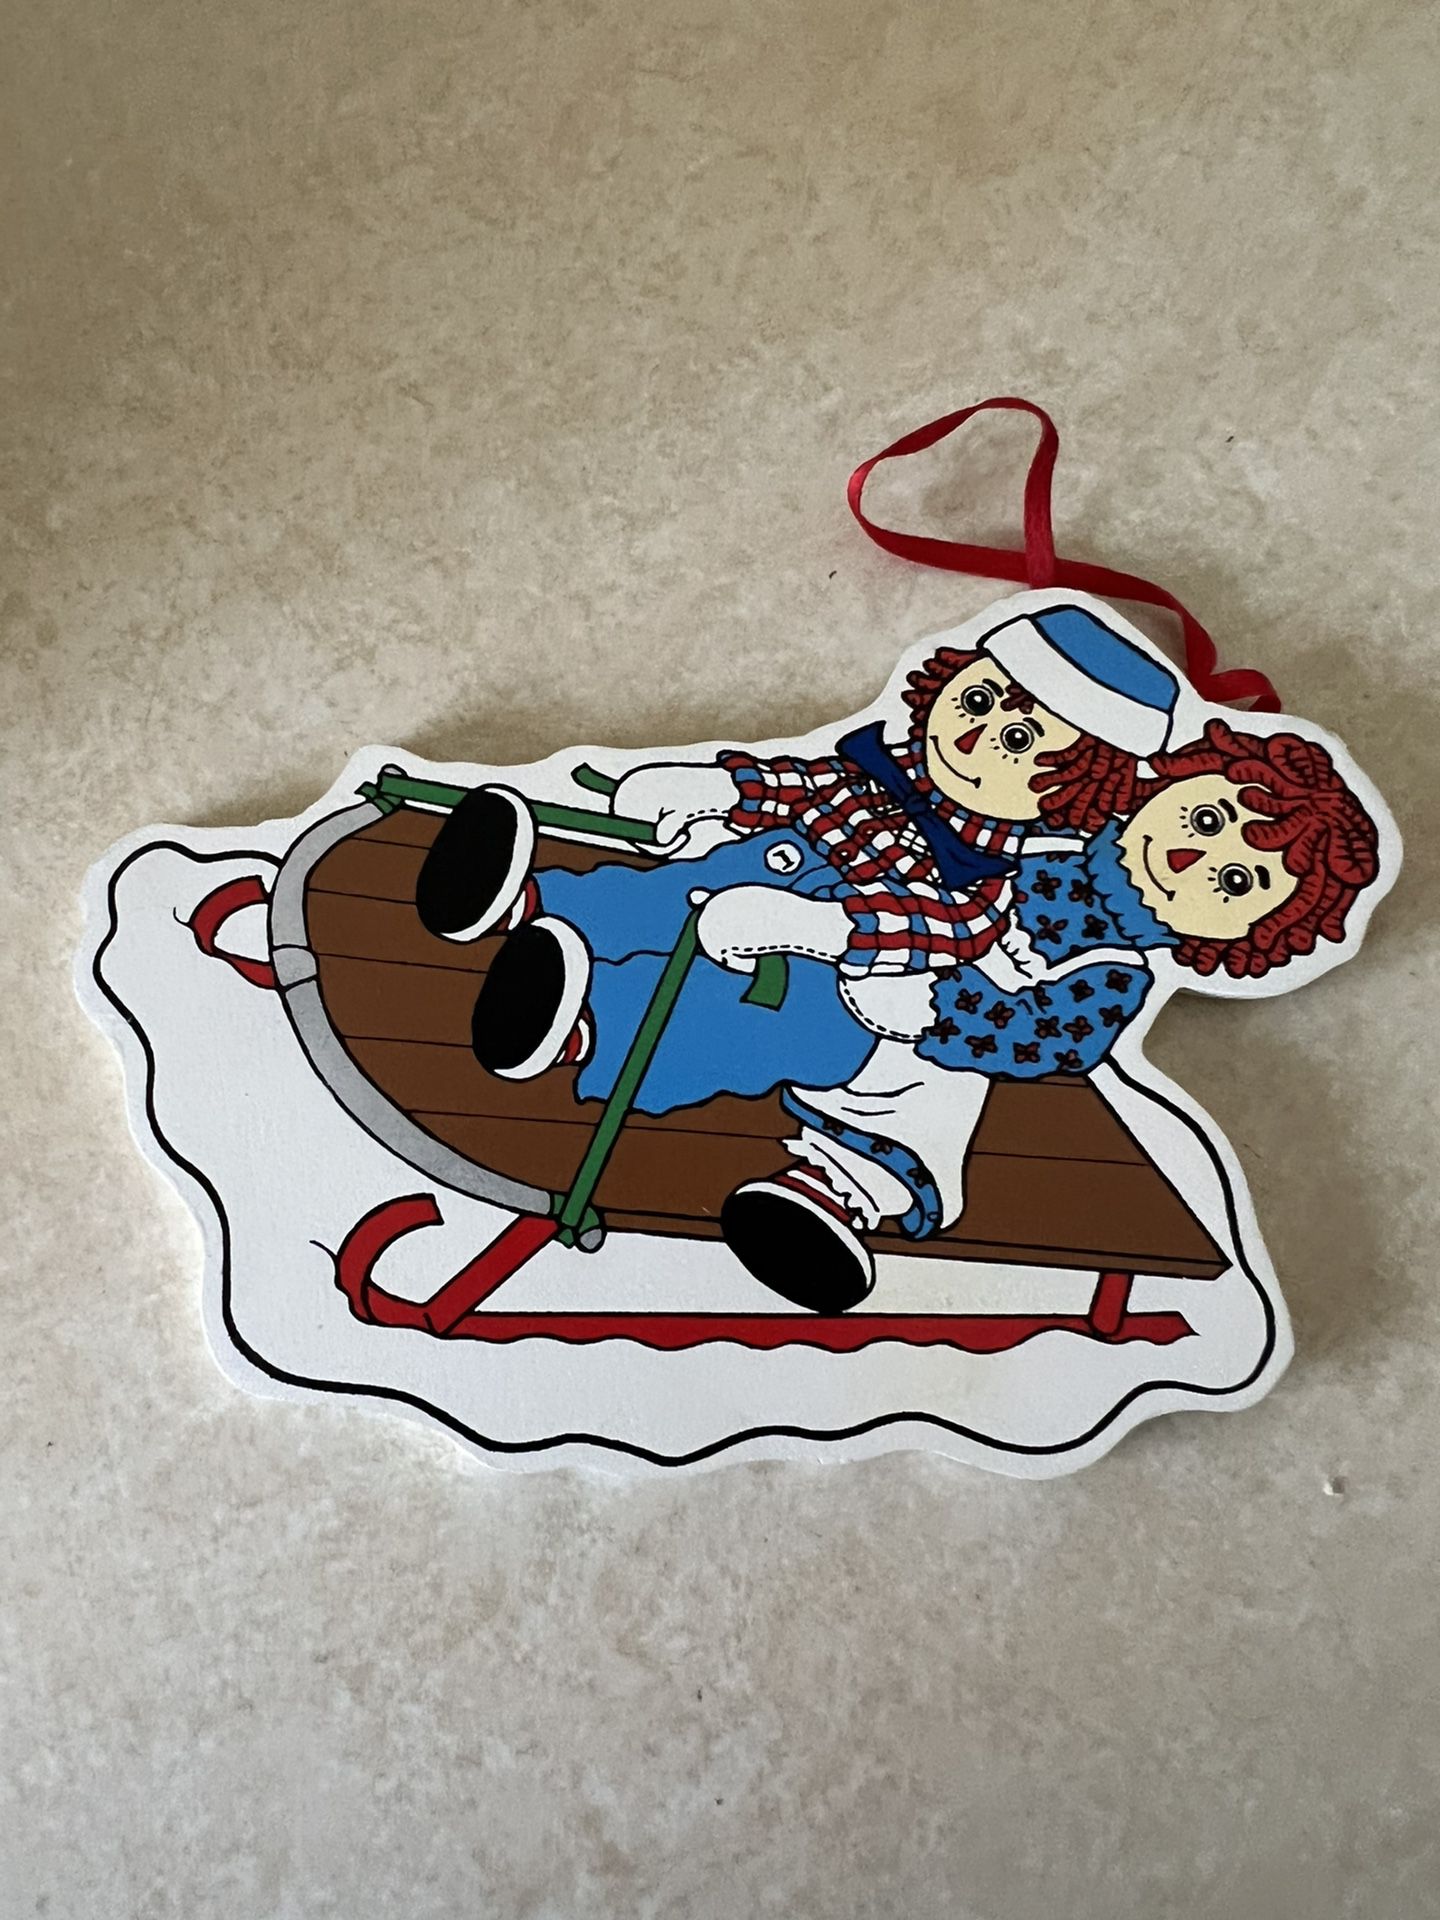 Wooden Raggedy Ann & Andy Ornament